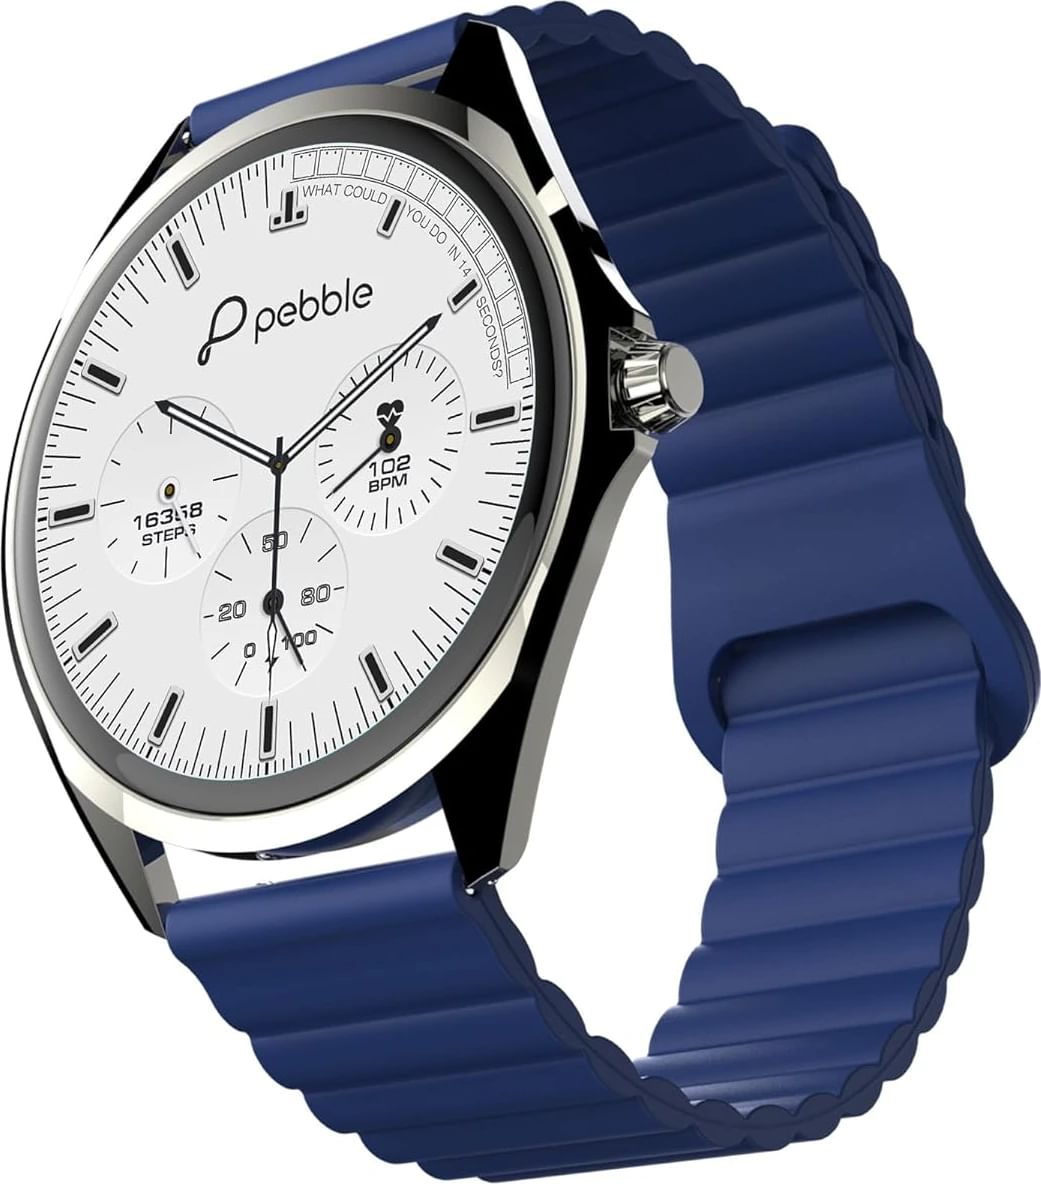 Affordable Pebble Frost Pro and Crest smartwatch series launched; price to  specs, check it all